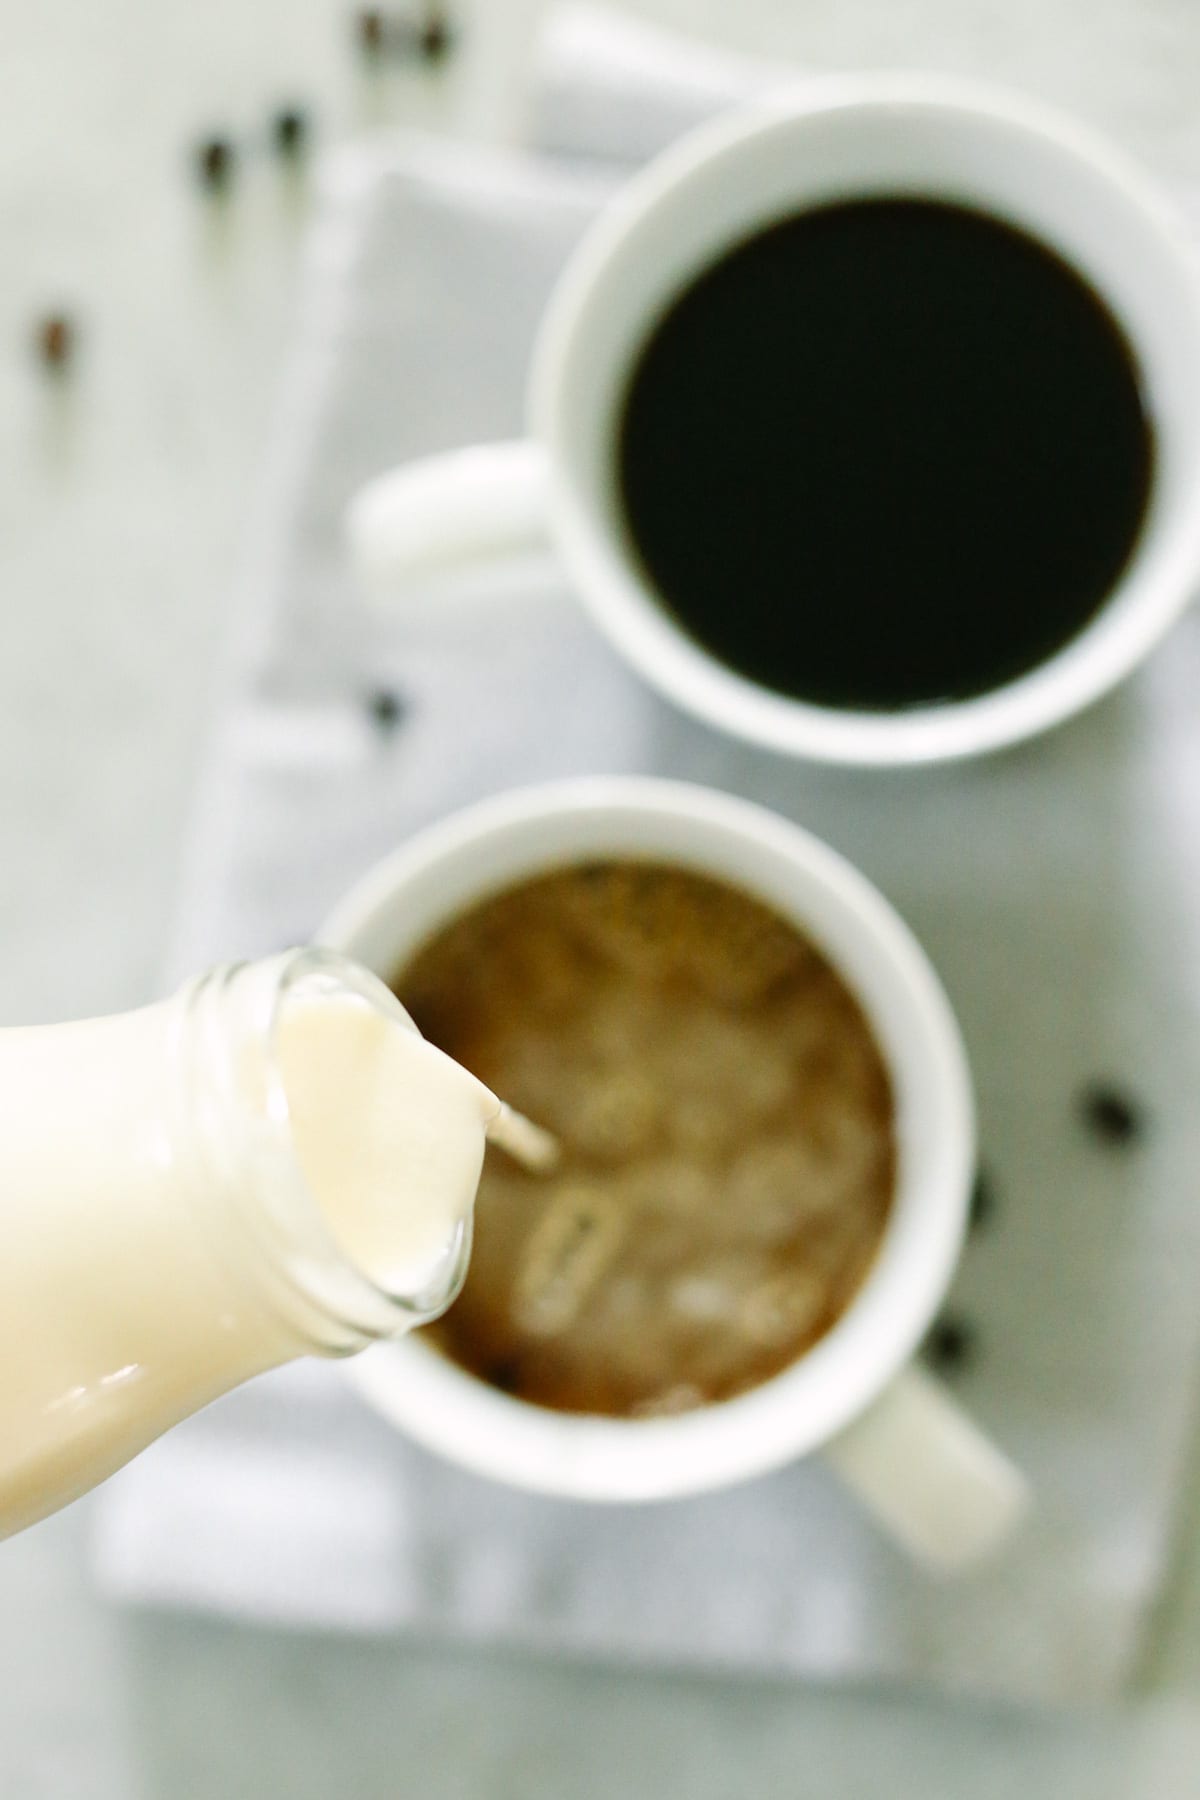 Homemade coffee creamer with only four REAL ingredients! No cans or fake ingredients.